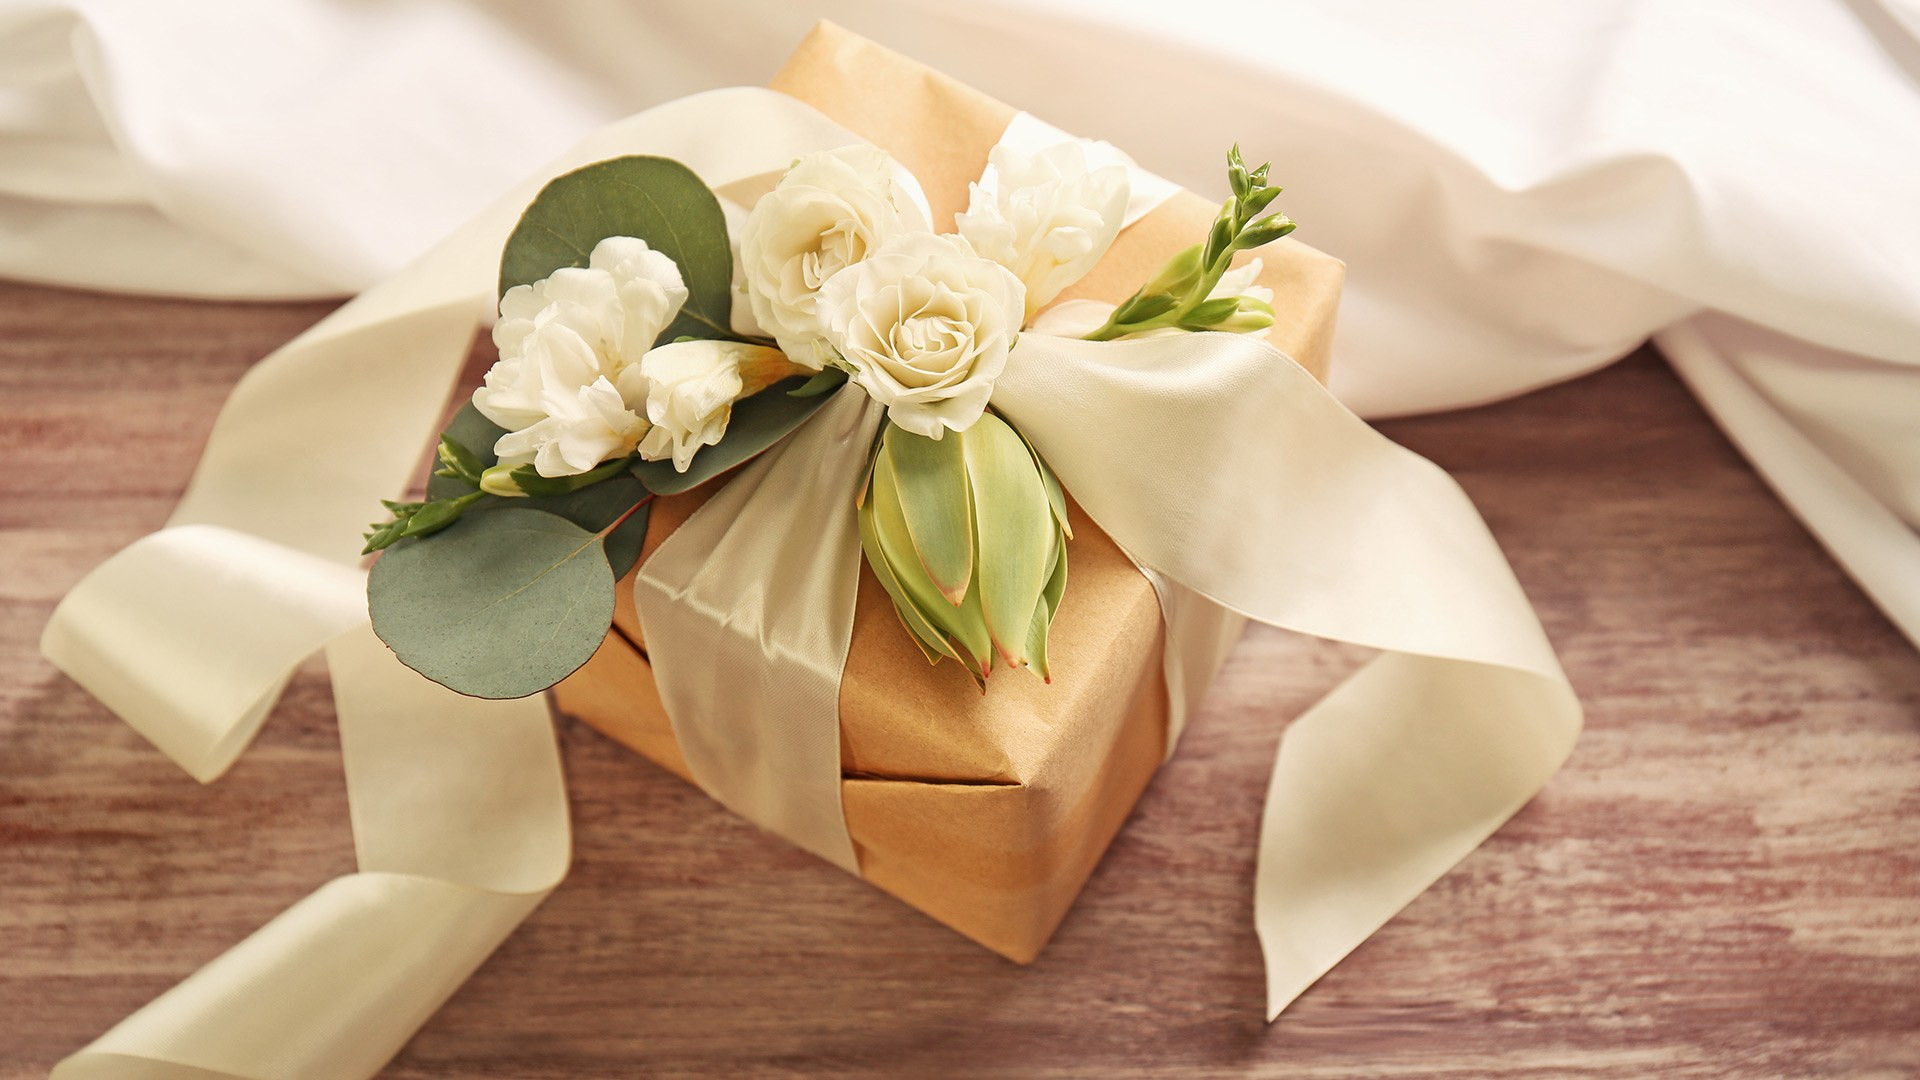 Wedding Gift Ideas For Wealthy Couple
 Top 10 Most Luxurious Wedding Gift Ideas for Wealthy